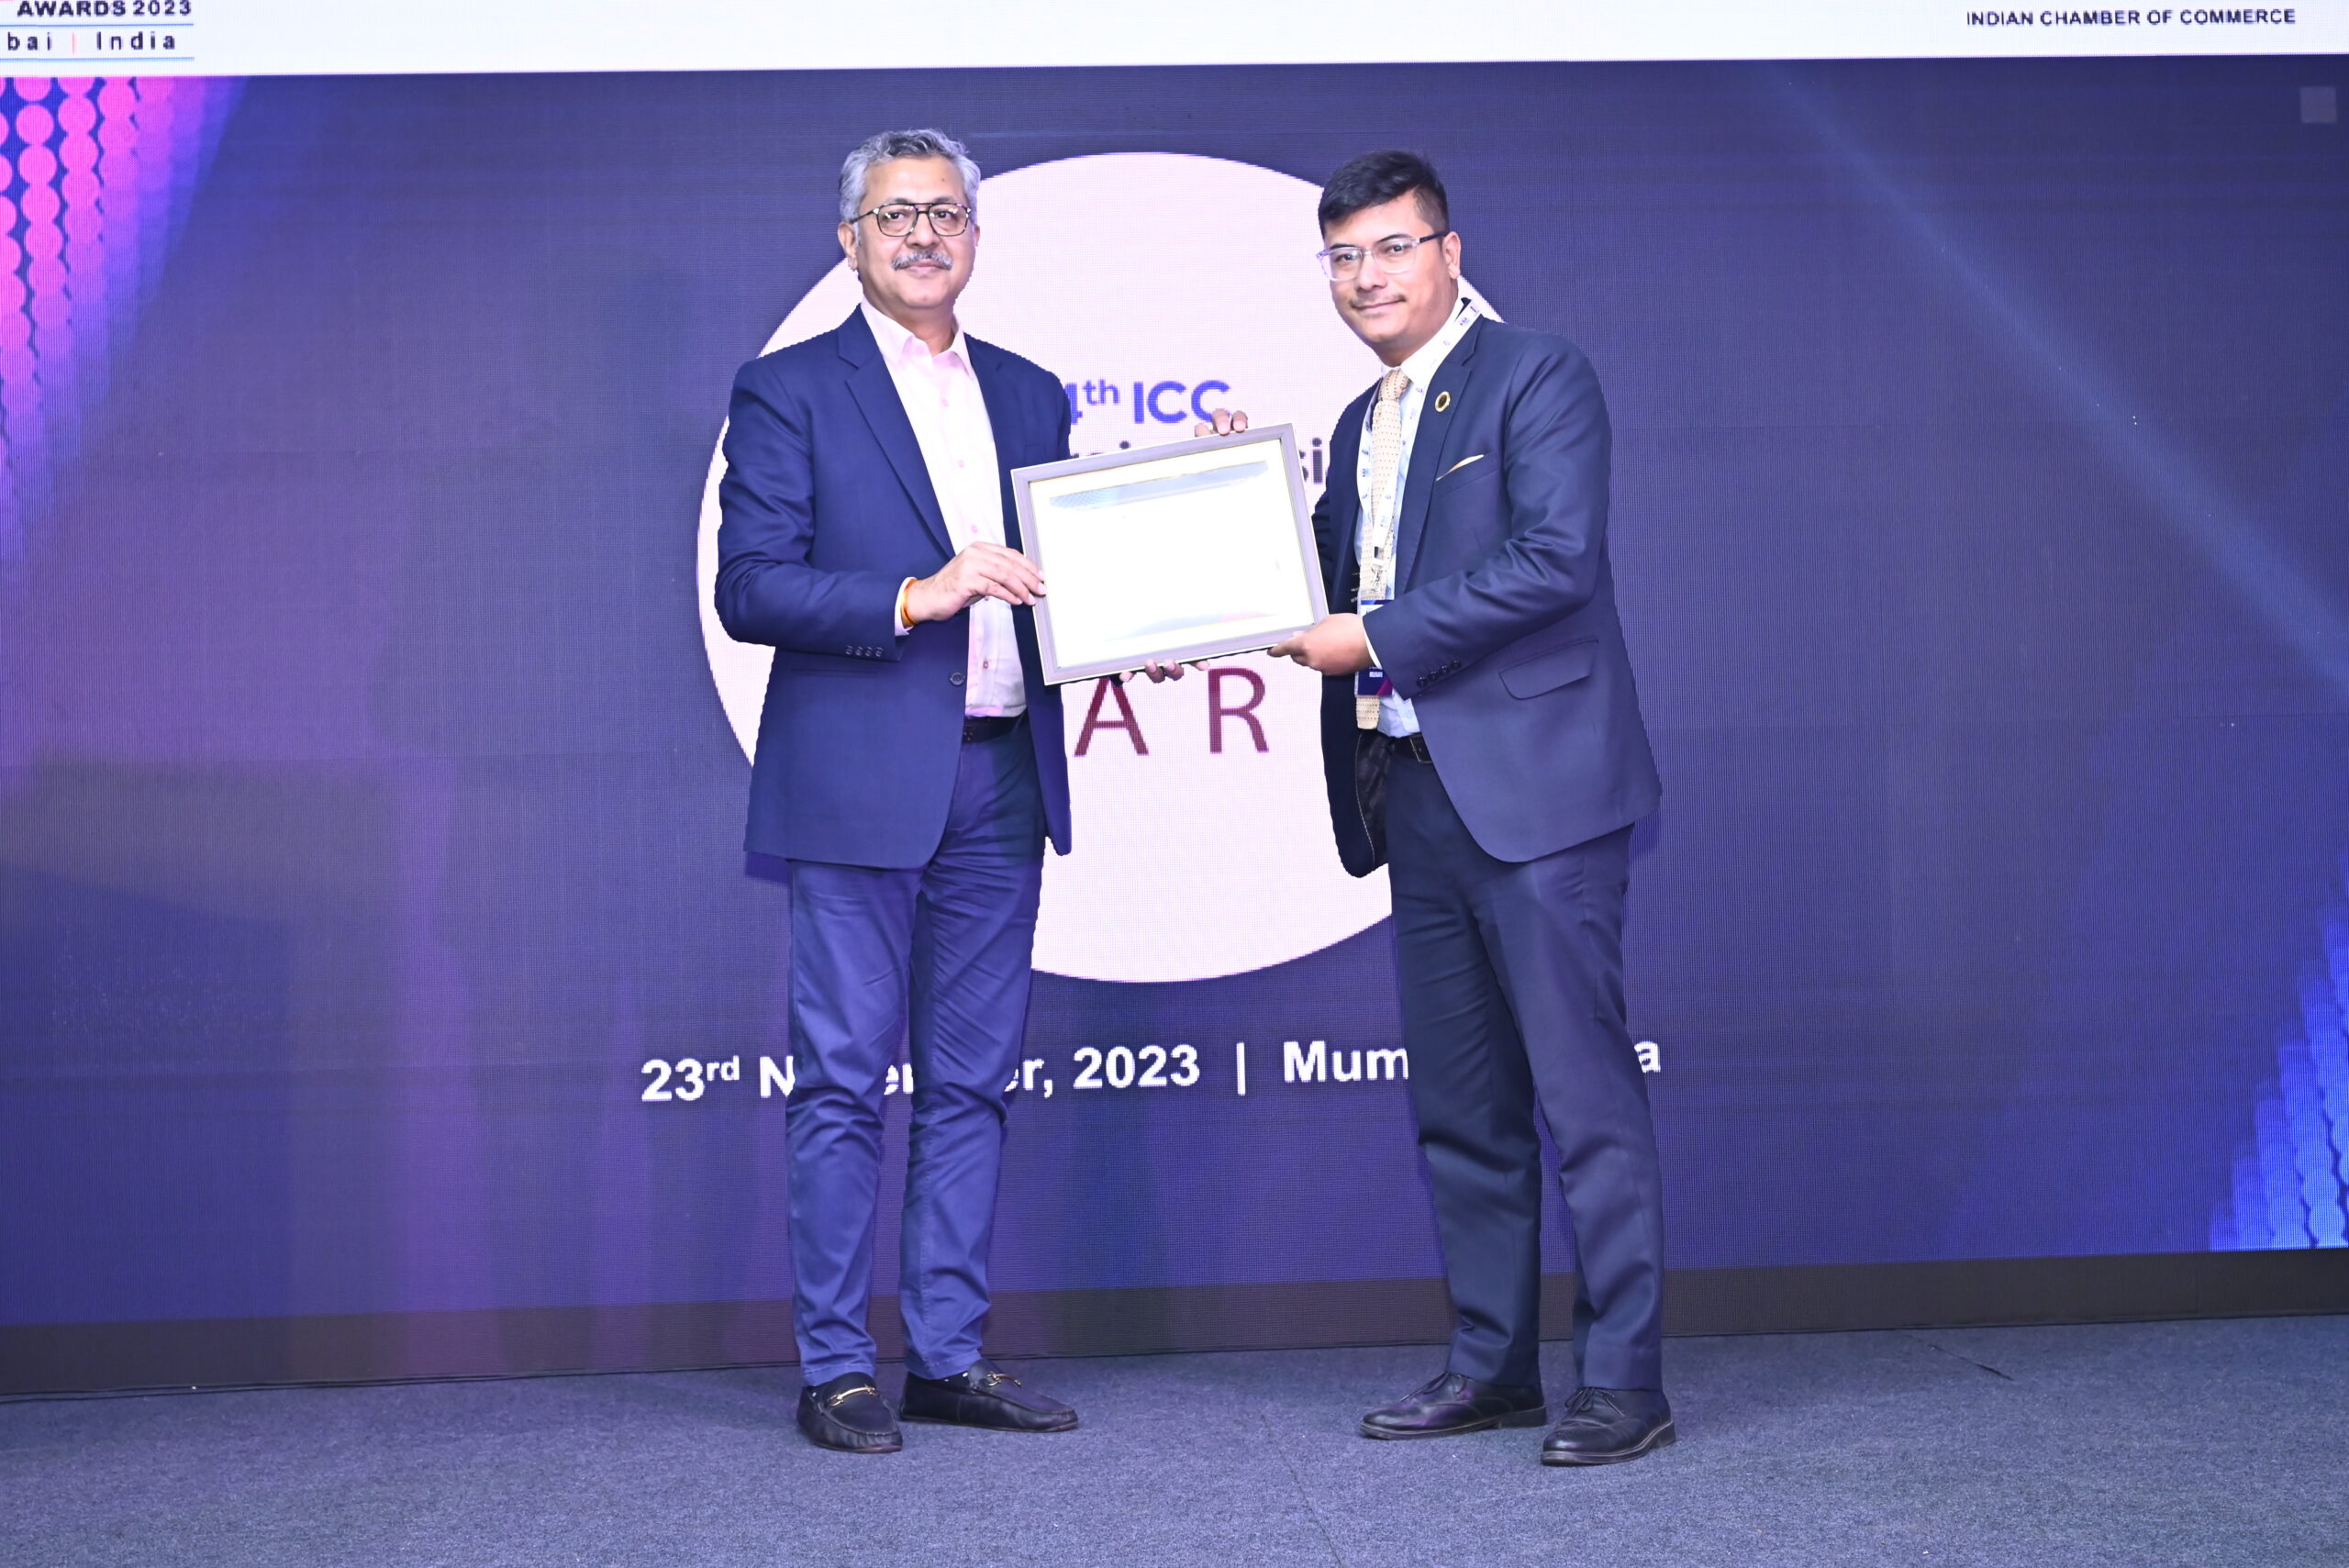 National Life honored by ICC Emerging Asia Insurance Conclave